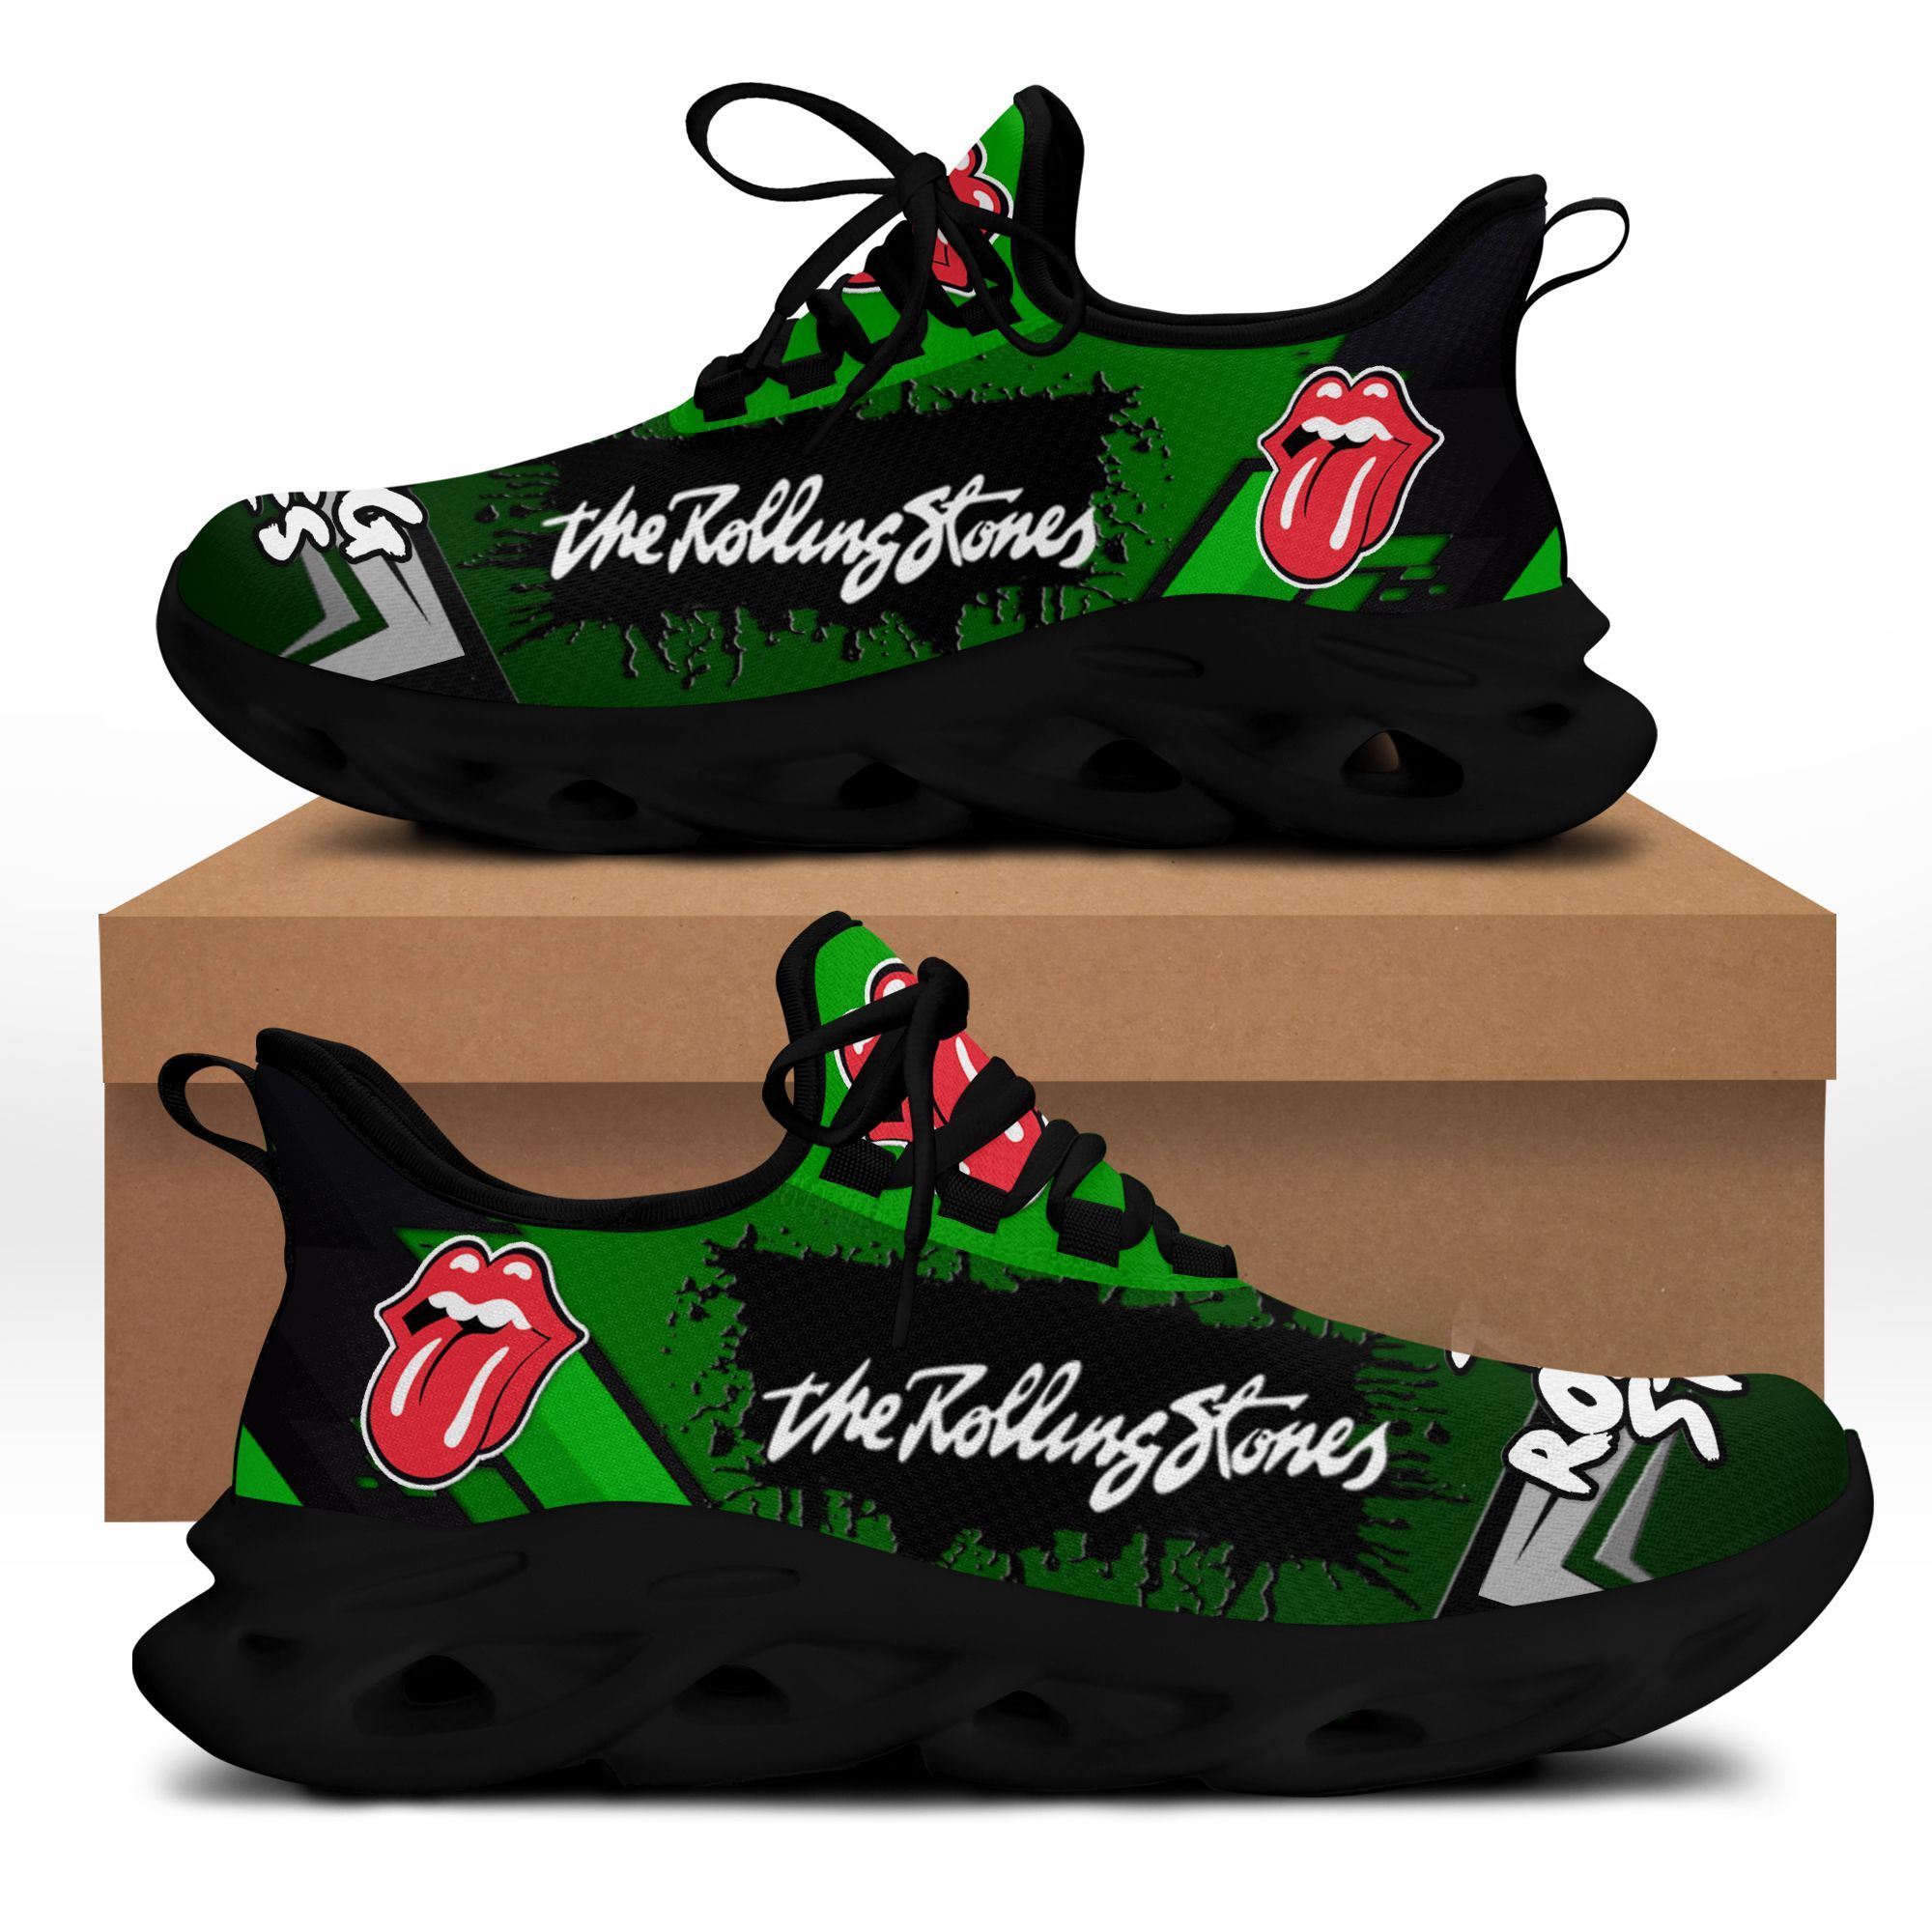 The Rolling Stones NTH-HL BS Running Shoes Ver 3 (Green)